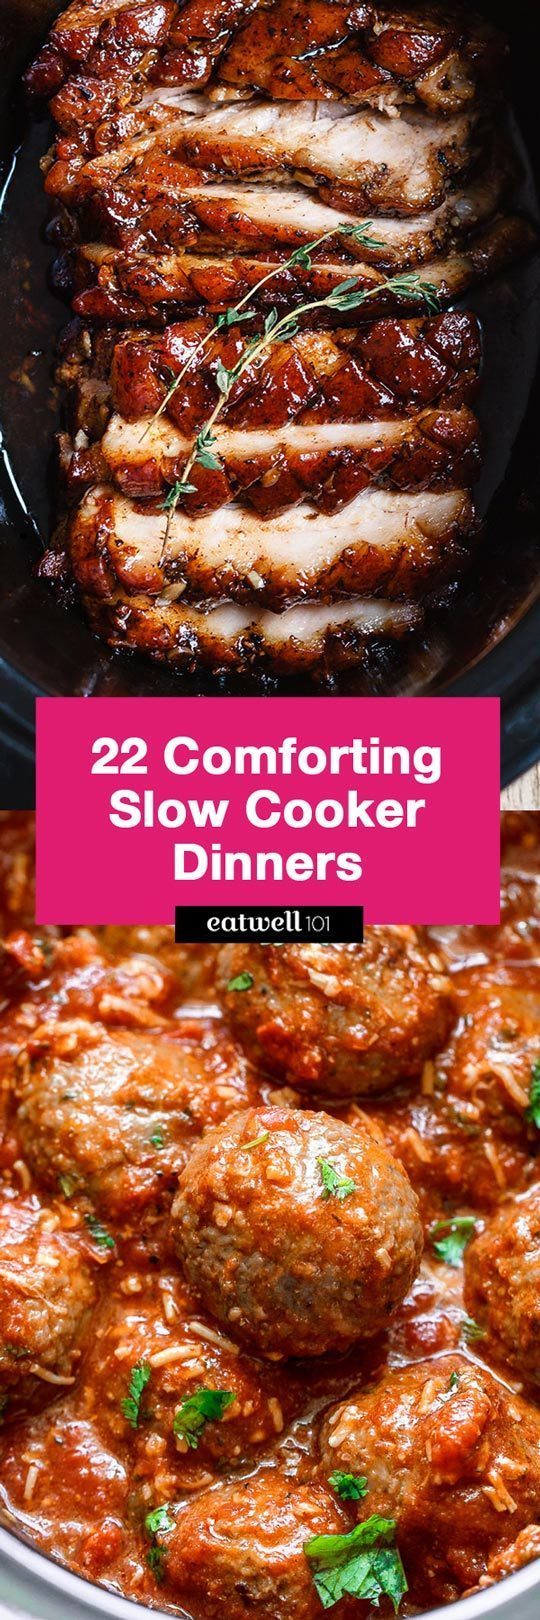 Comforting Slow Cooker for Dinner - Here is a selection of our favorite slow cooker meals, perfect for all skill levels! Enjoy!